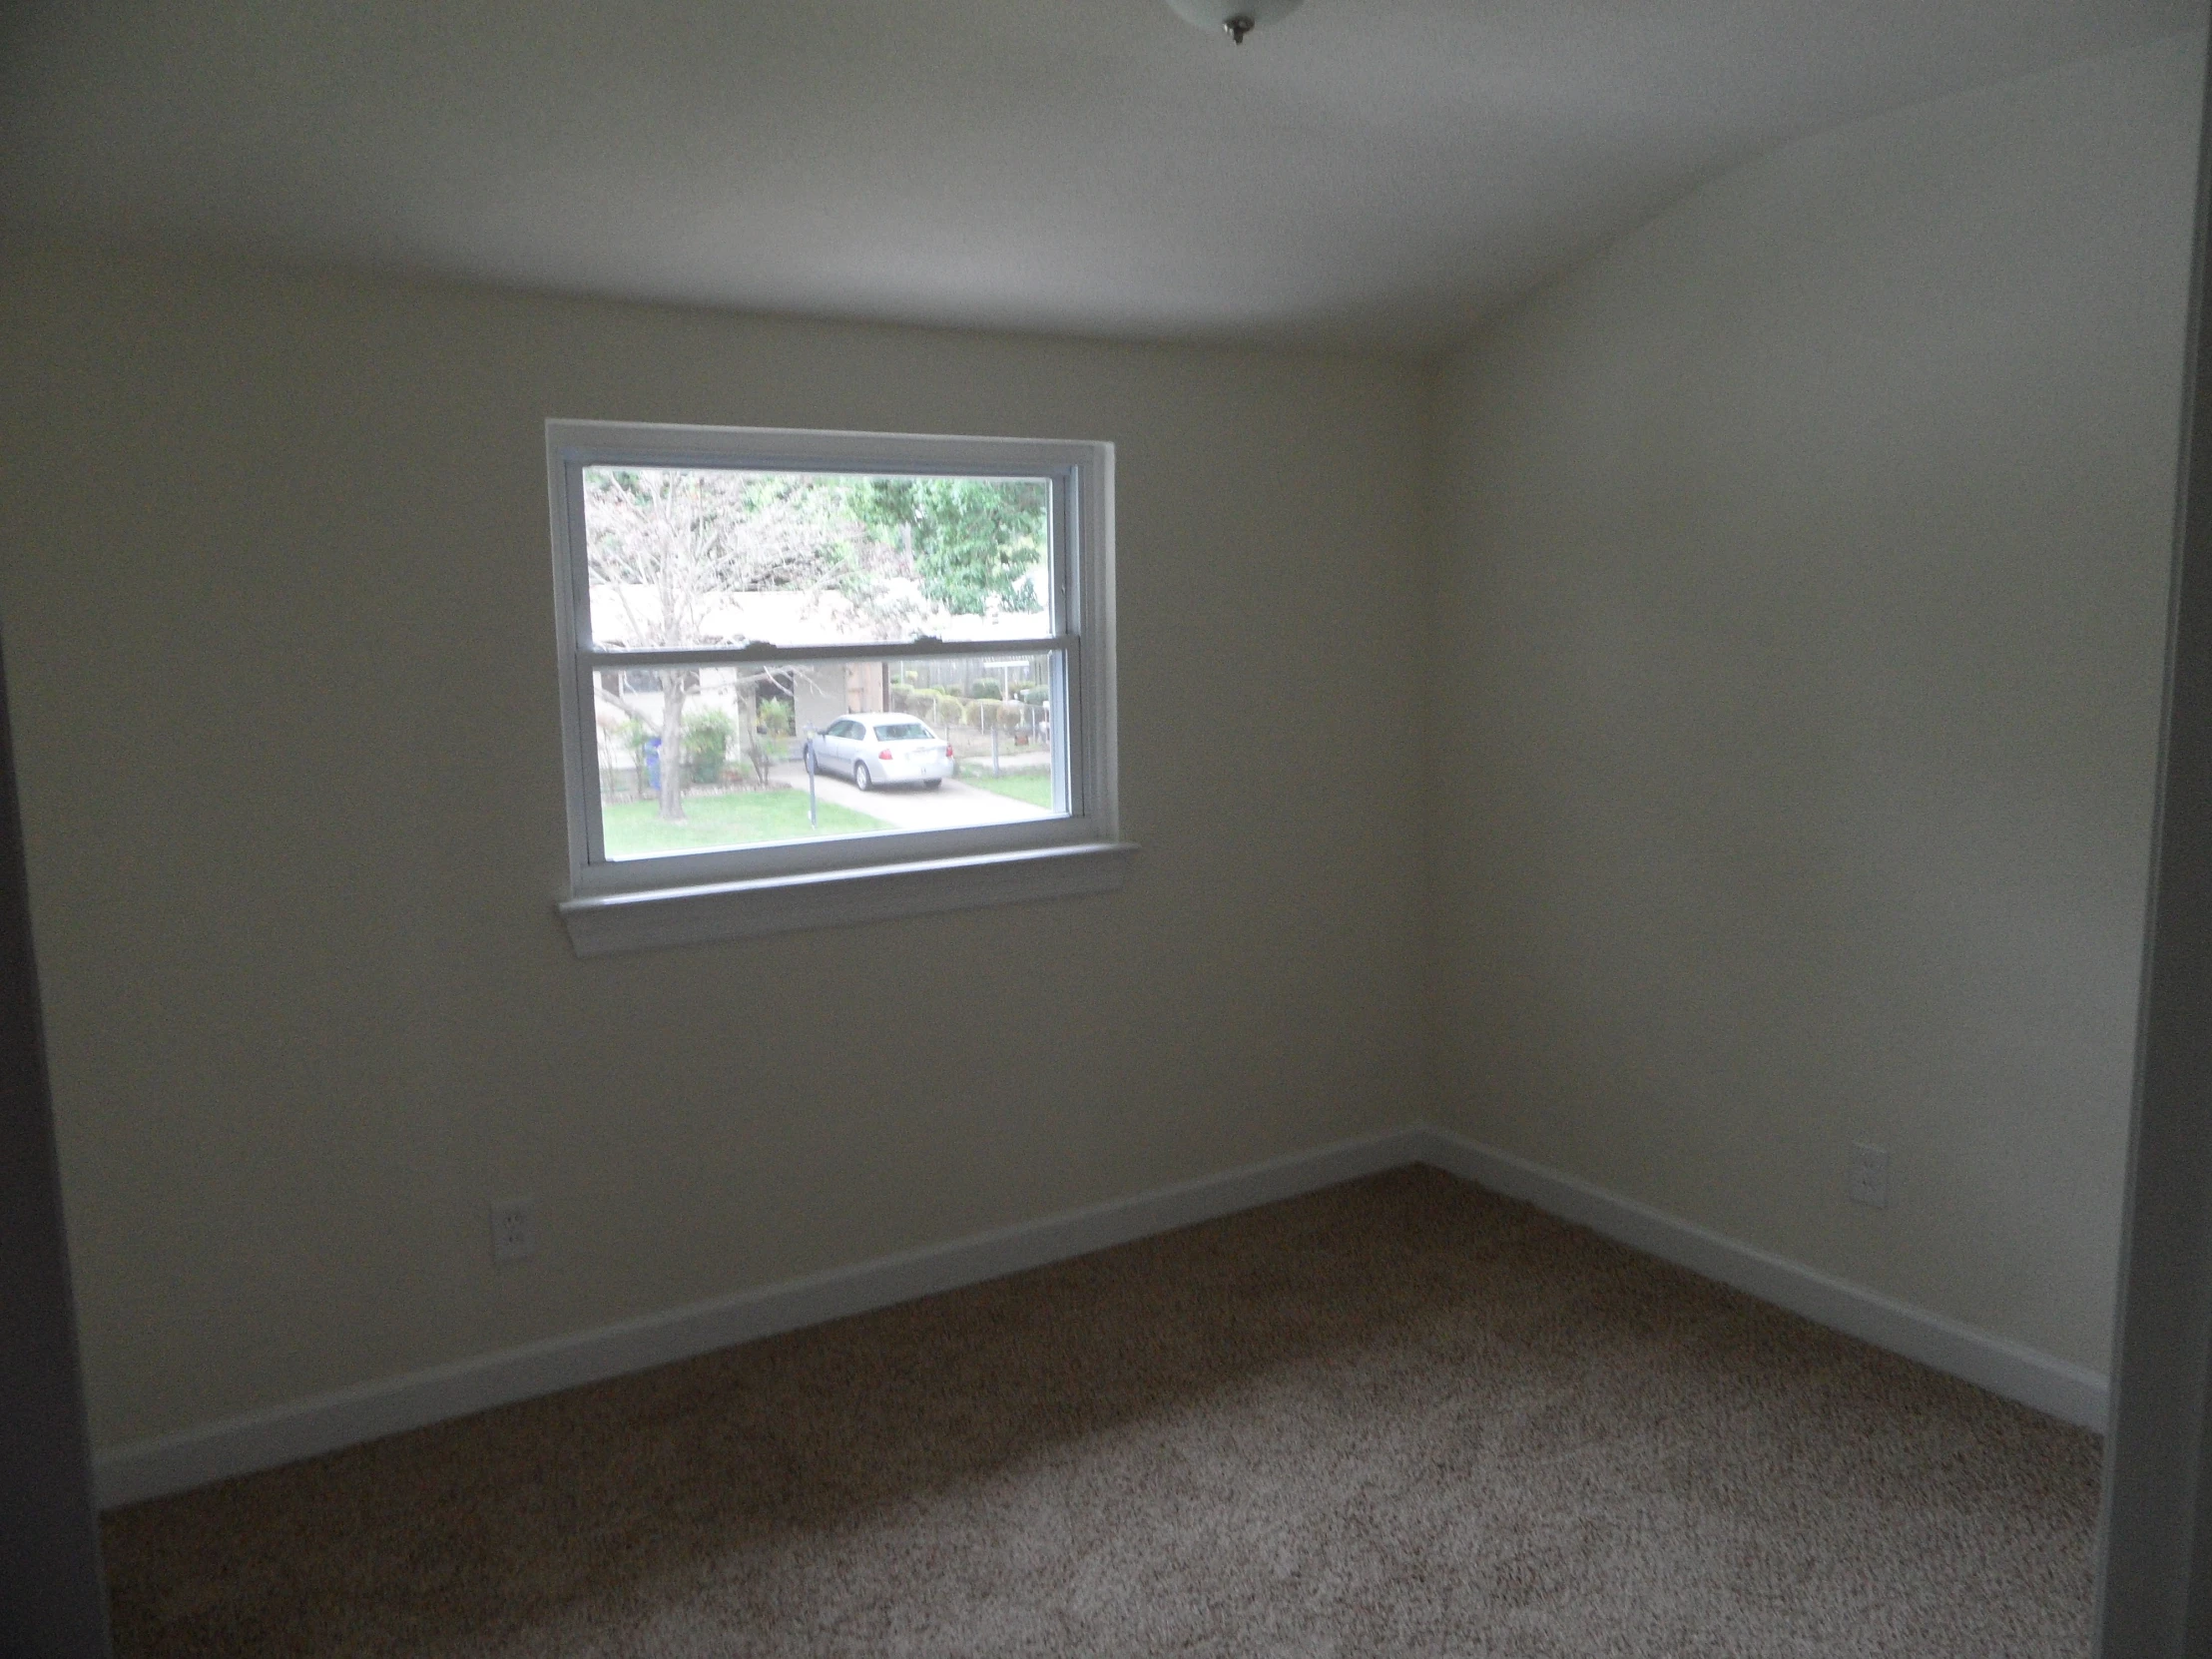 a empty room with a window and small door